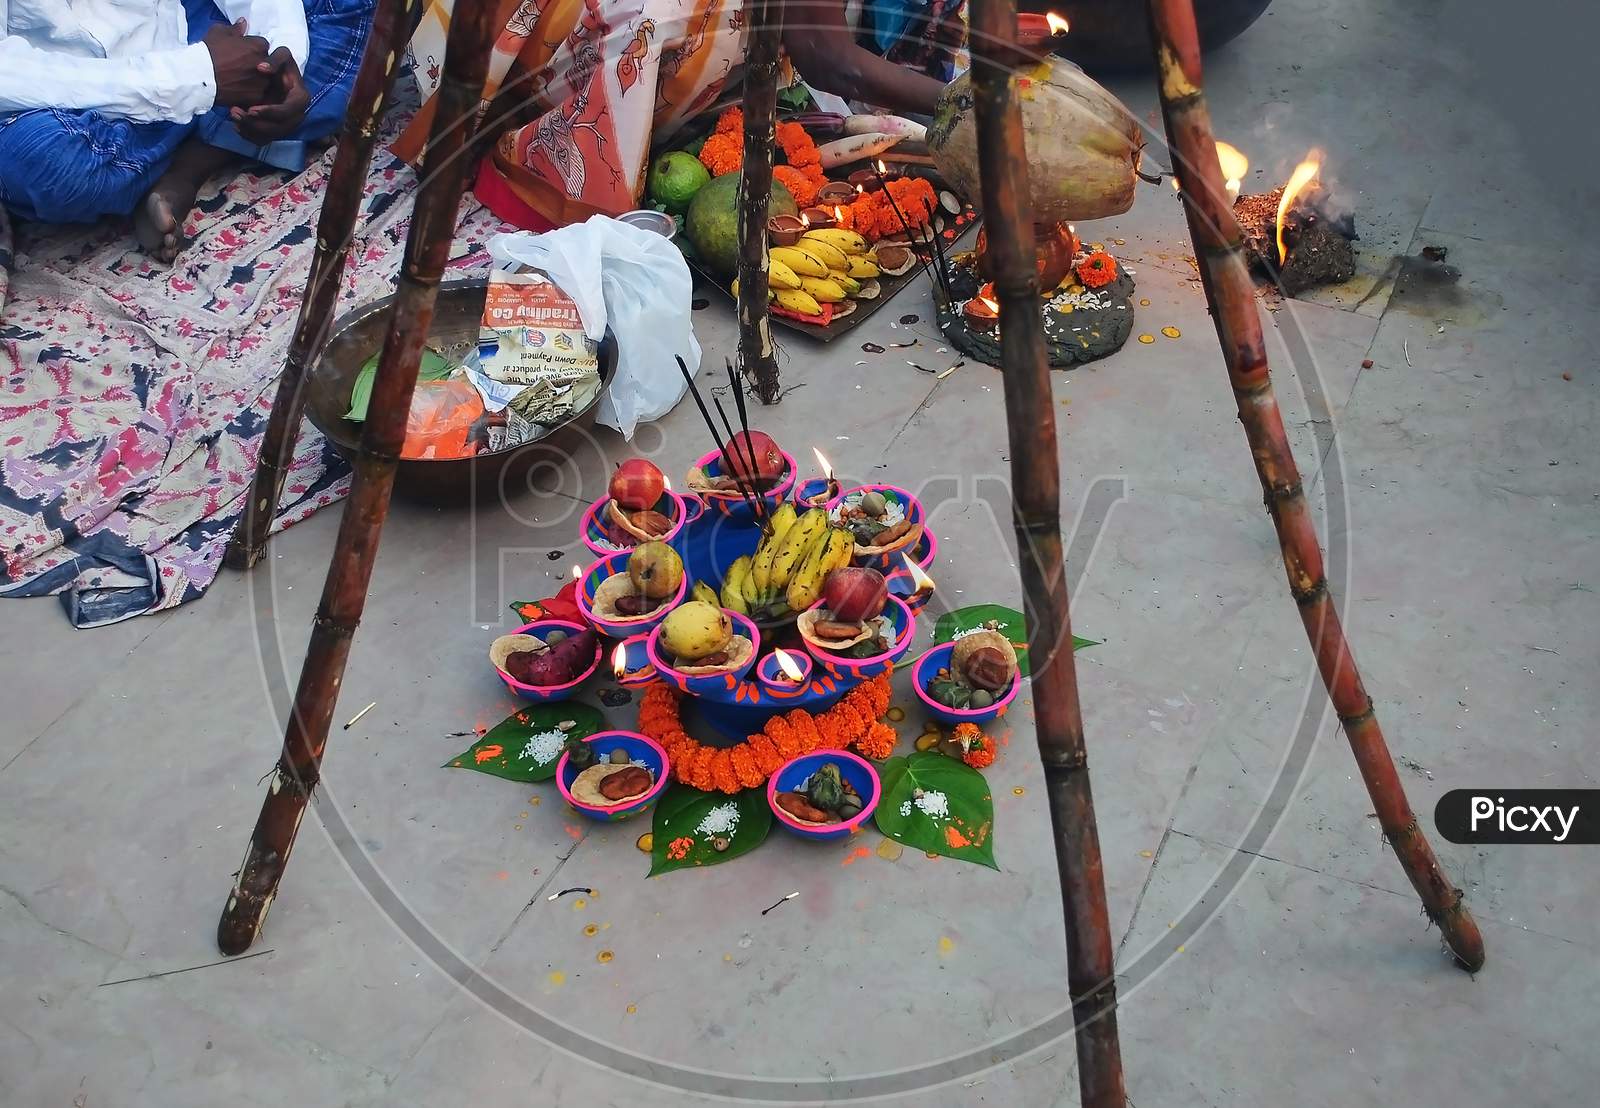 The decoration in Chat festival by the devotees.